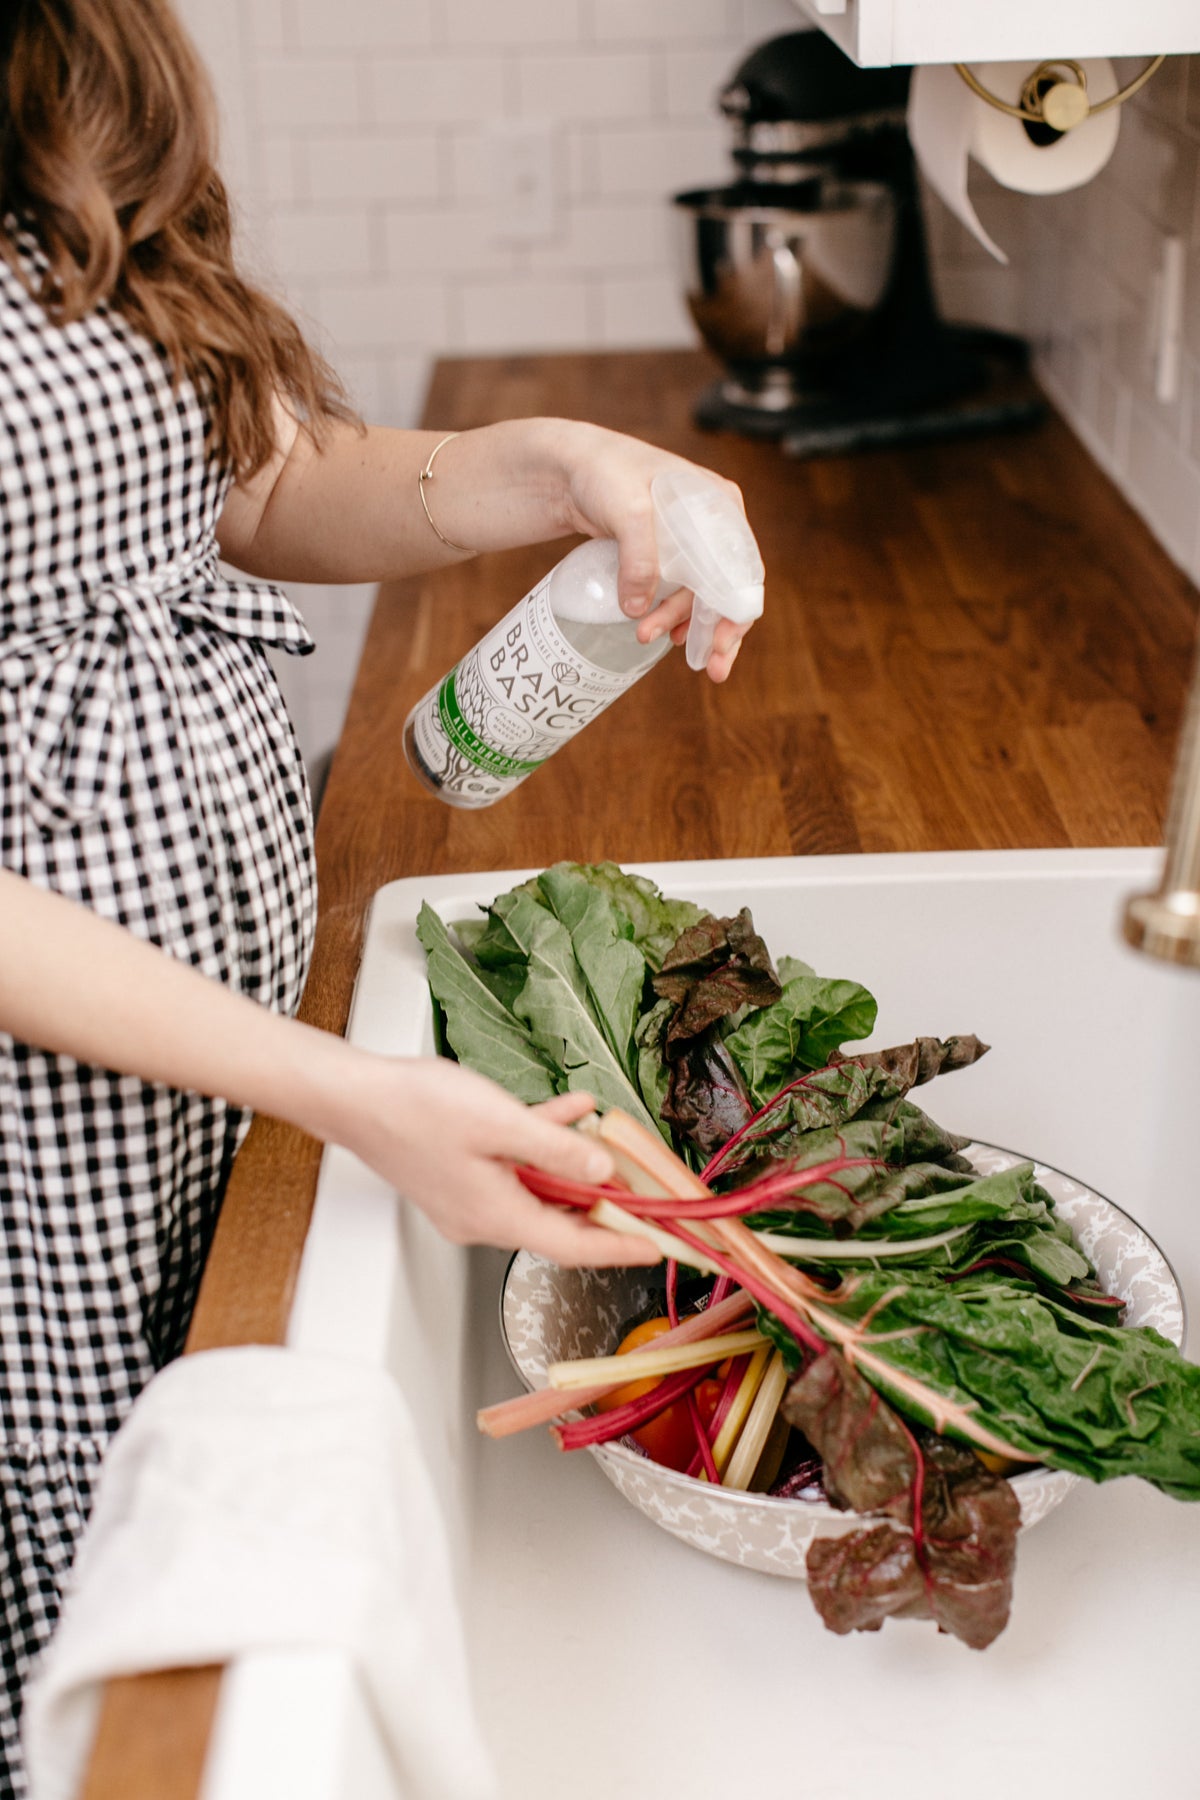 Fruit & Veggie Wash: 3 Easy-to-Follow Steps for Cleaner Produce